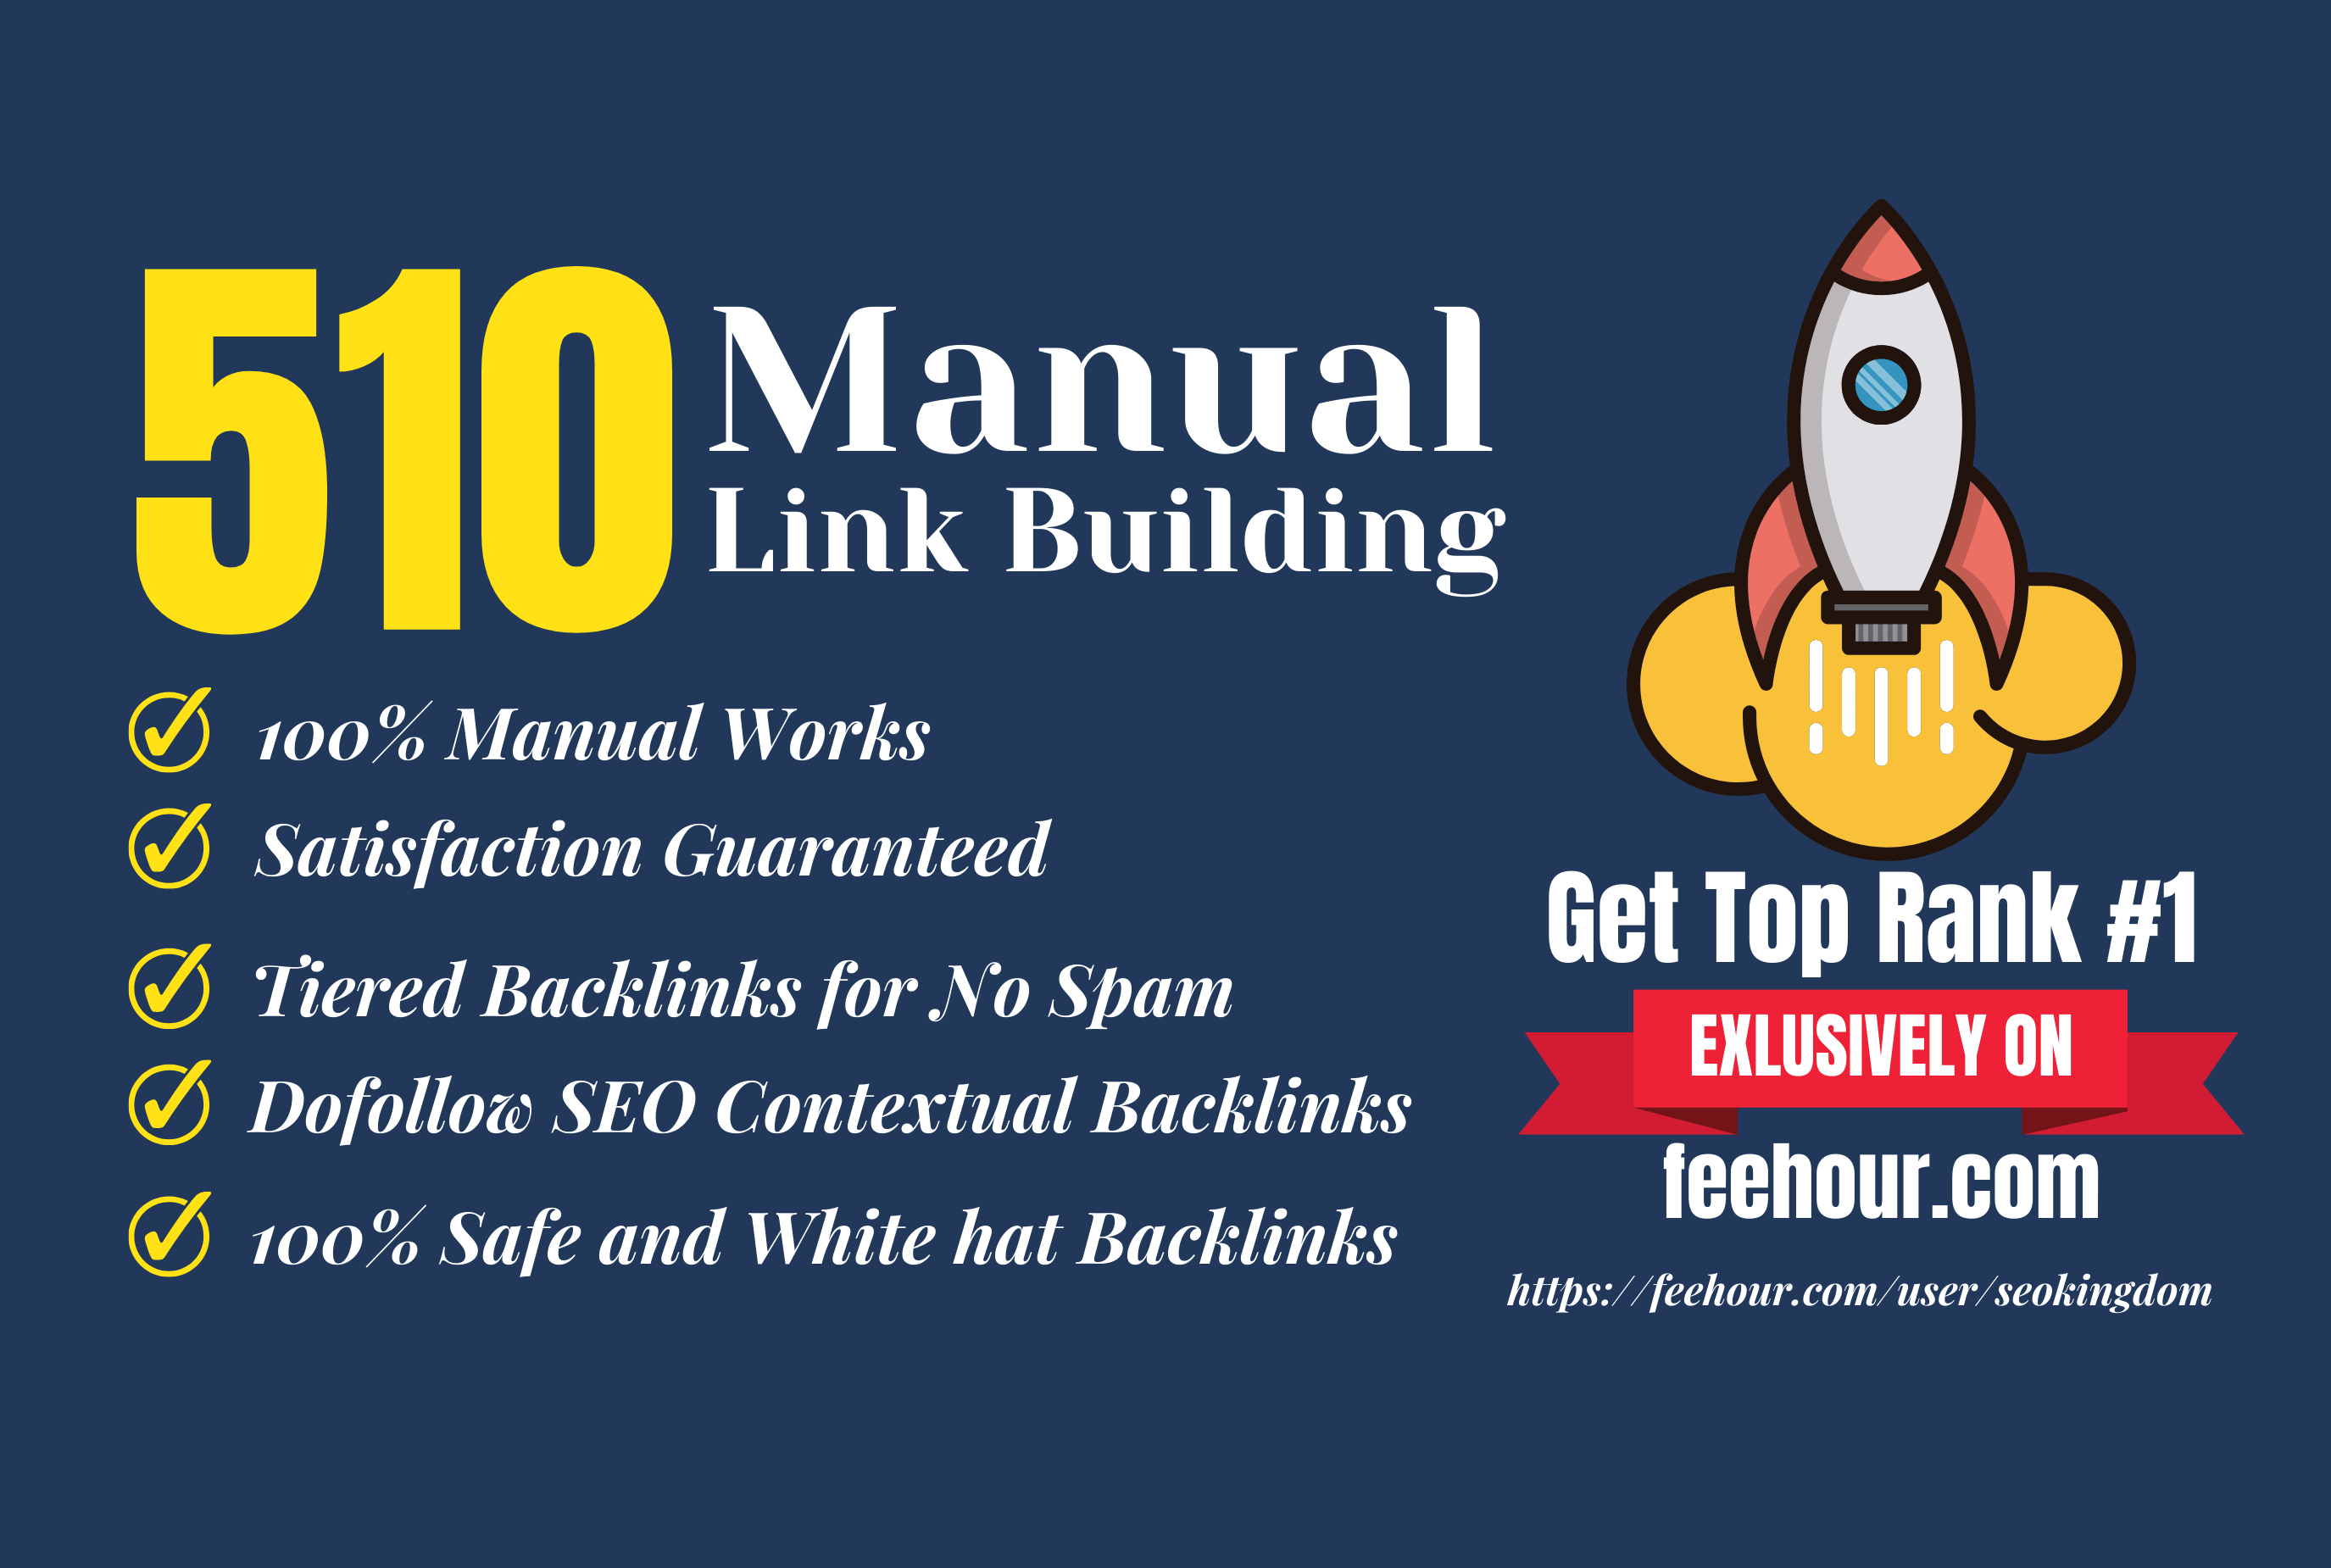 25232510 Manual Link building for Top Ranking